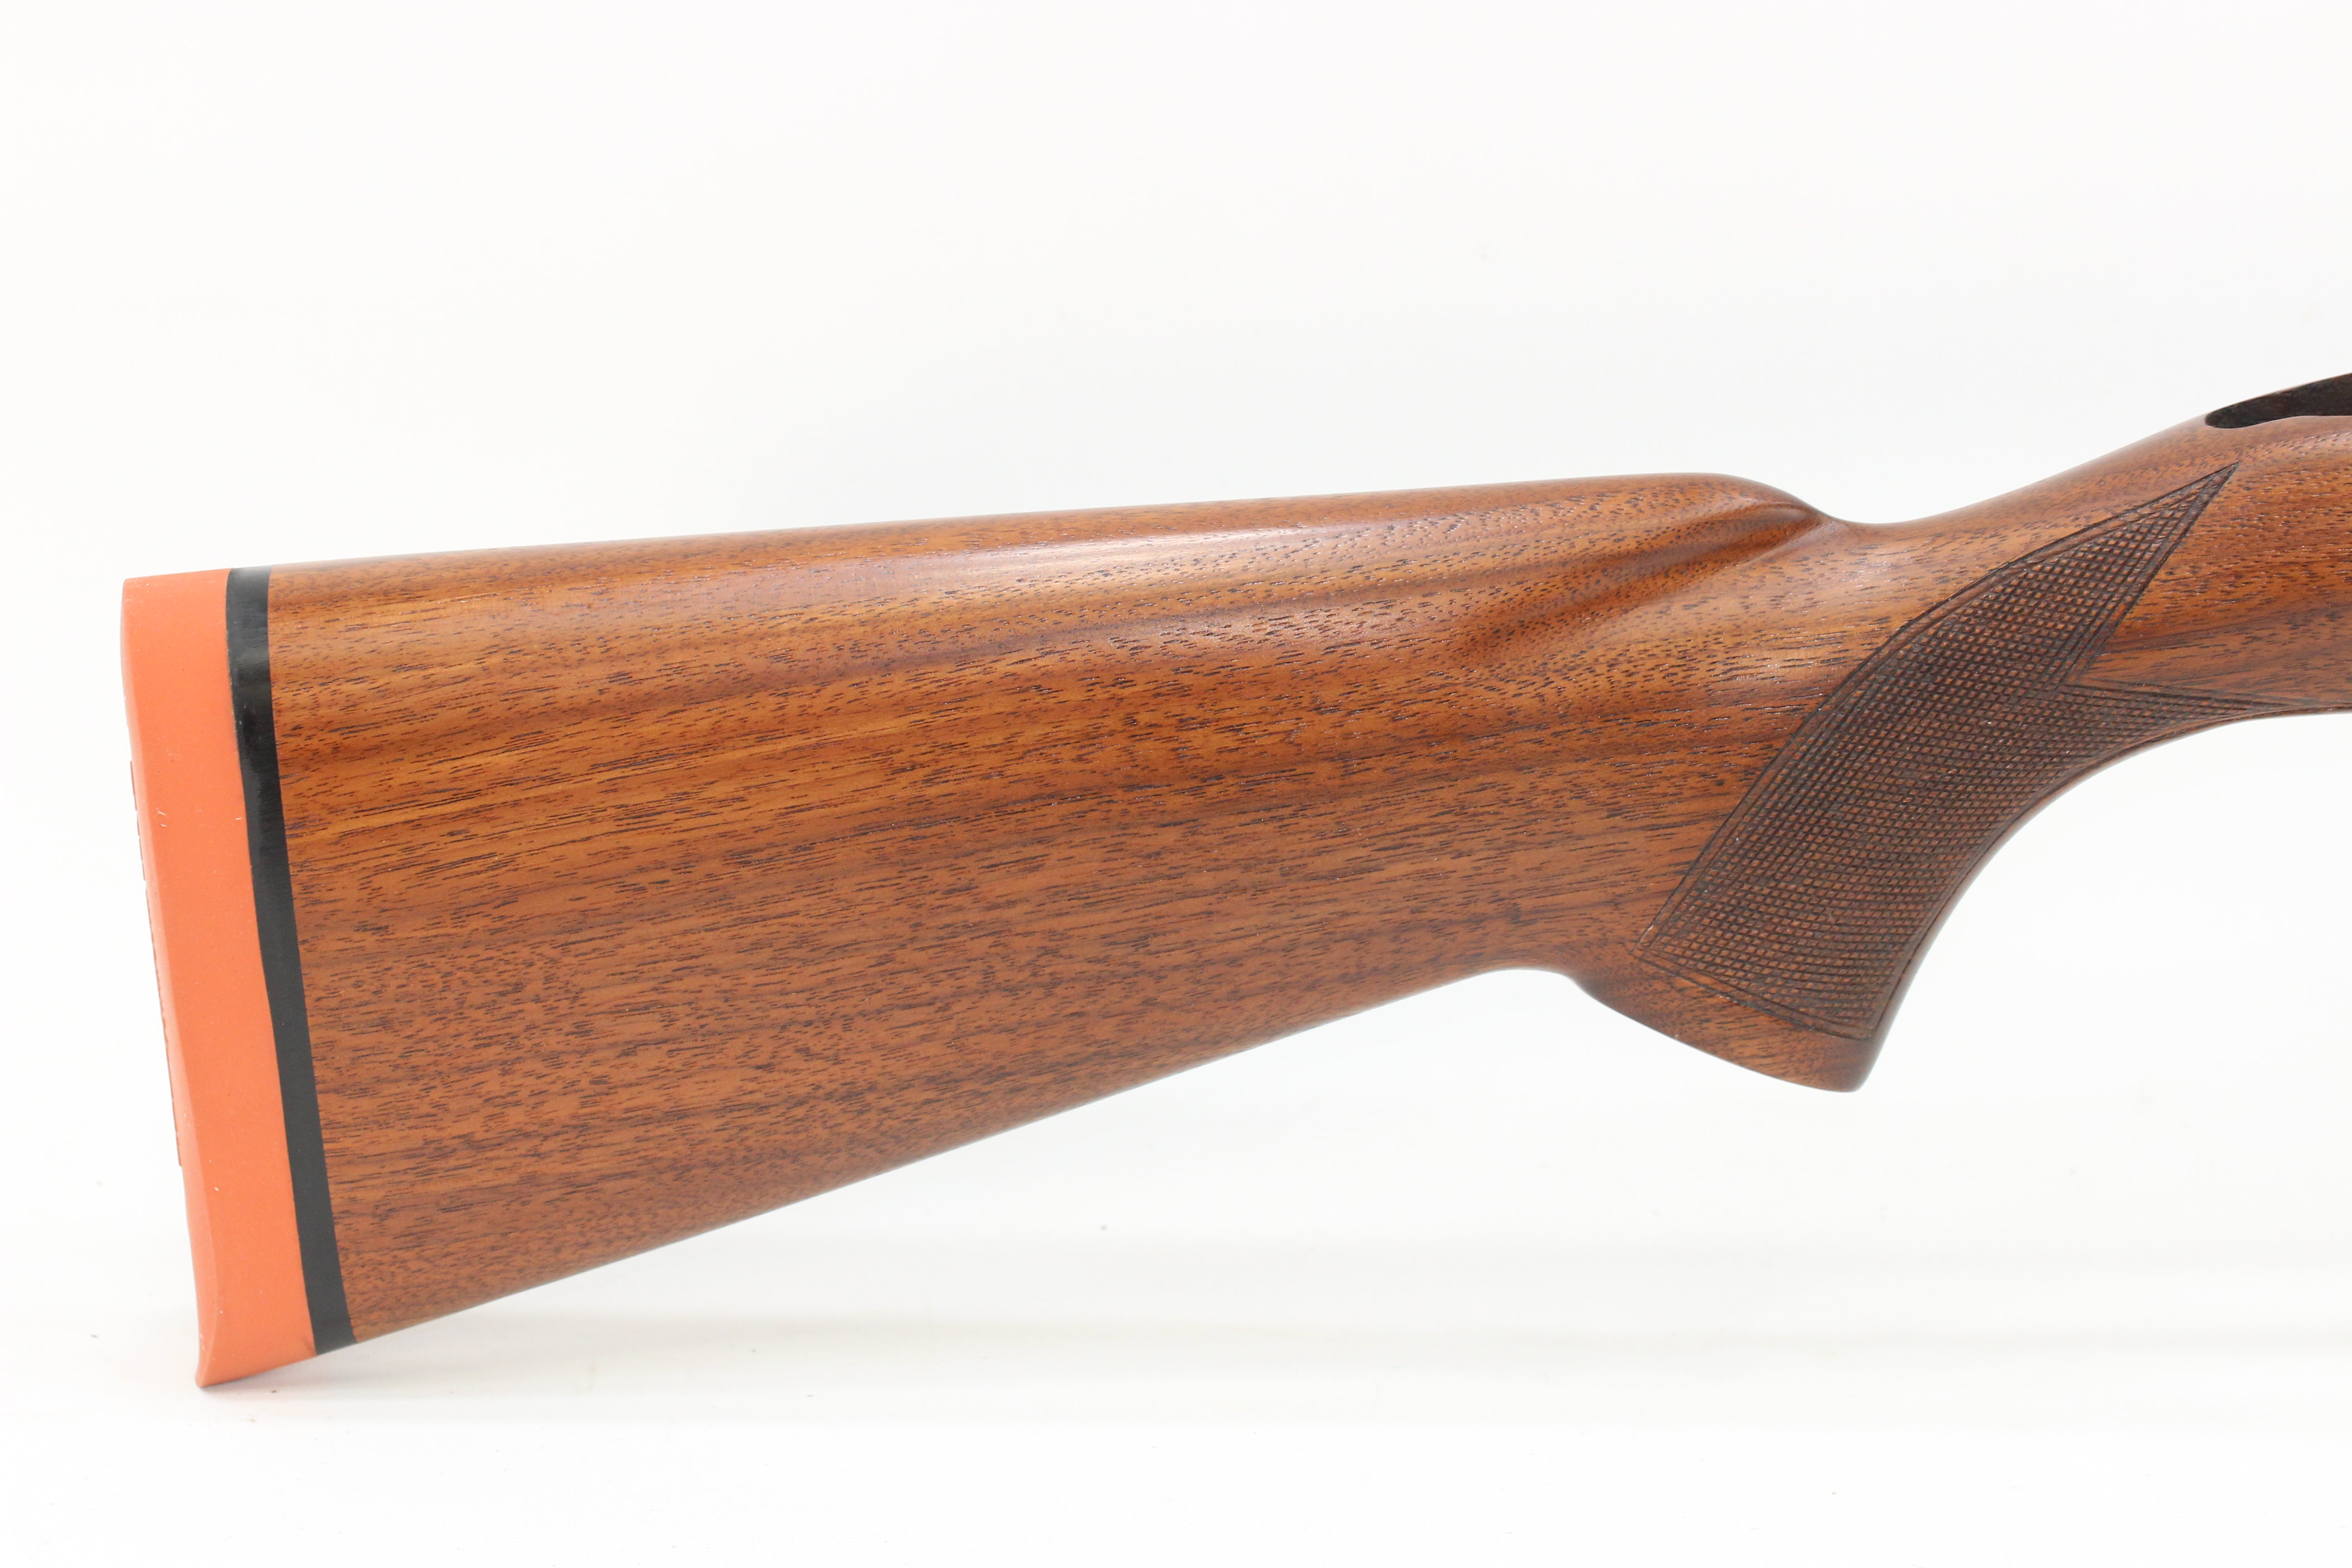 1941-1948 Low Comb Standard Rifle Stock - Shortened